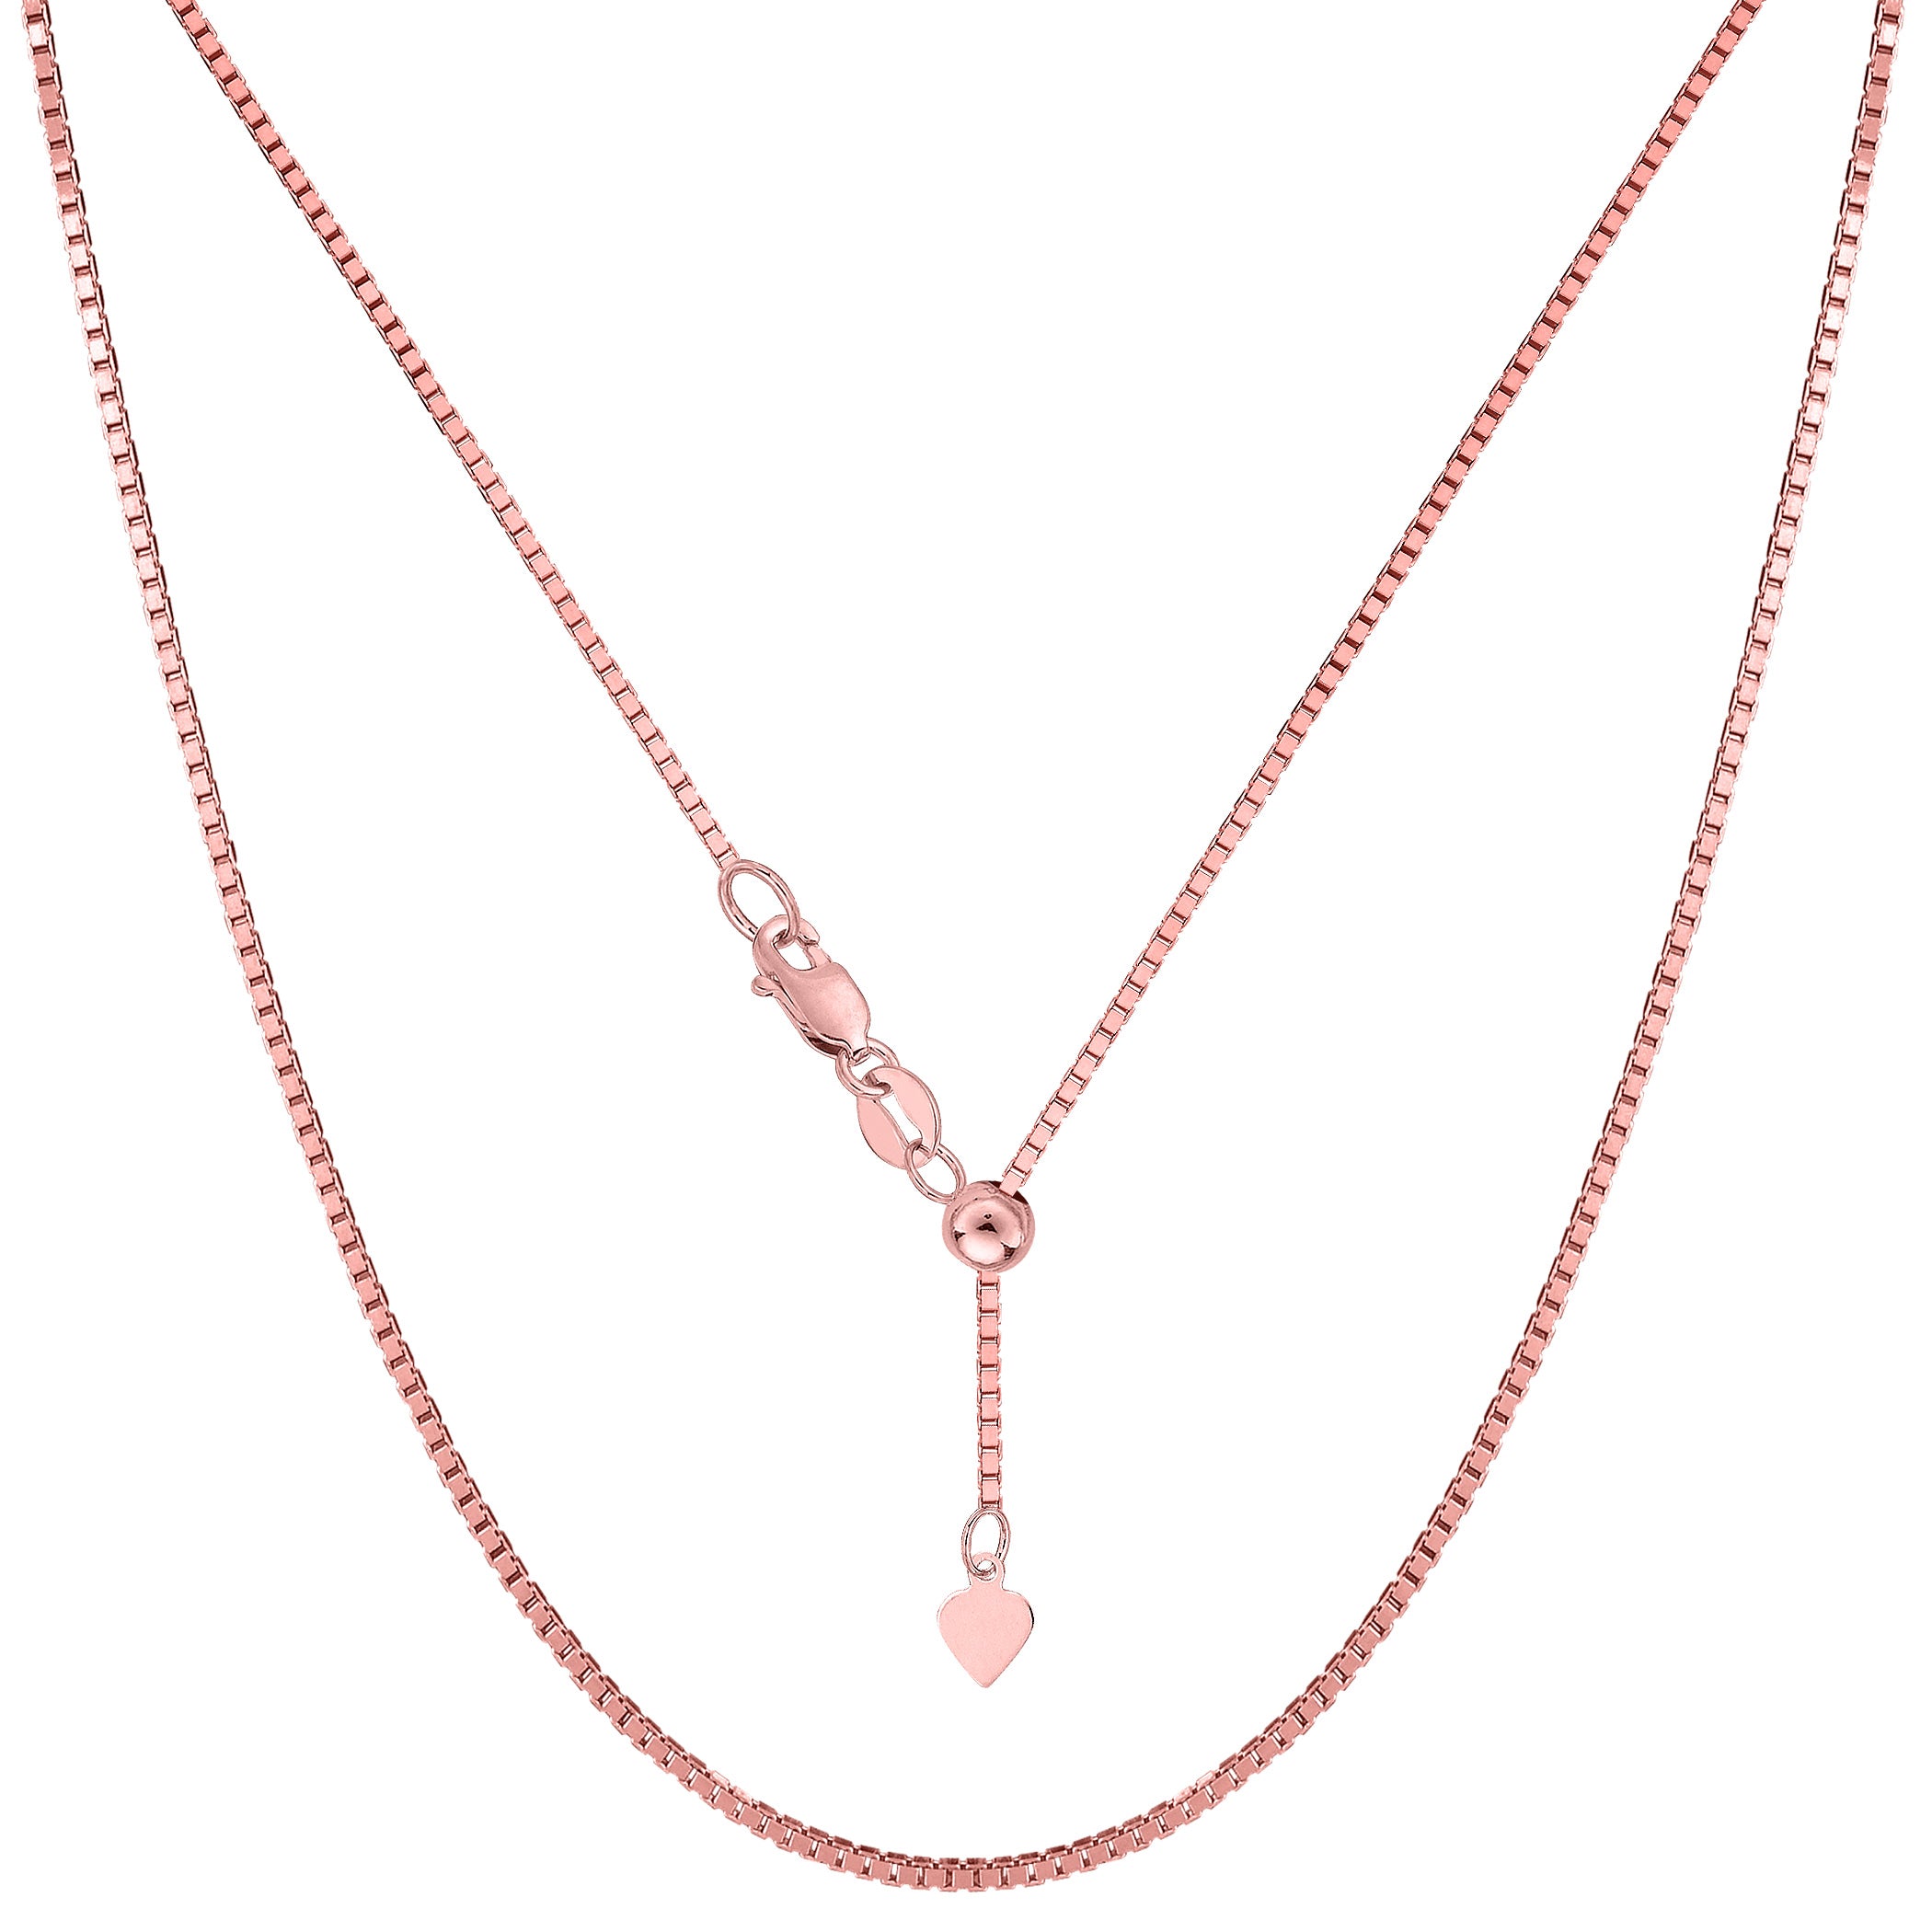 Sterling Silver Rose Tone Plated Sliding Adjustable Box Chain Necklace, 1.4mm, 22"